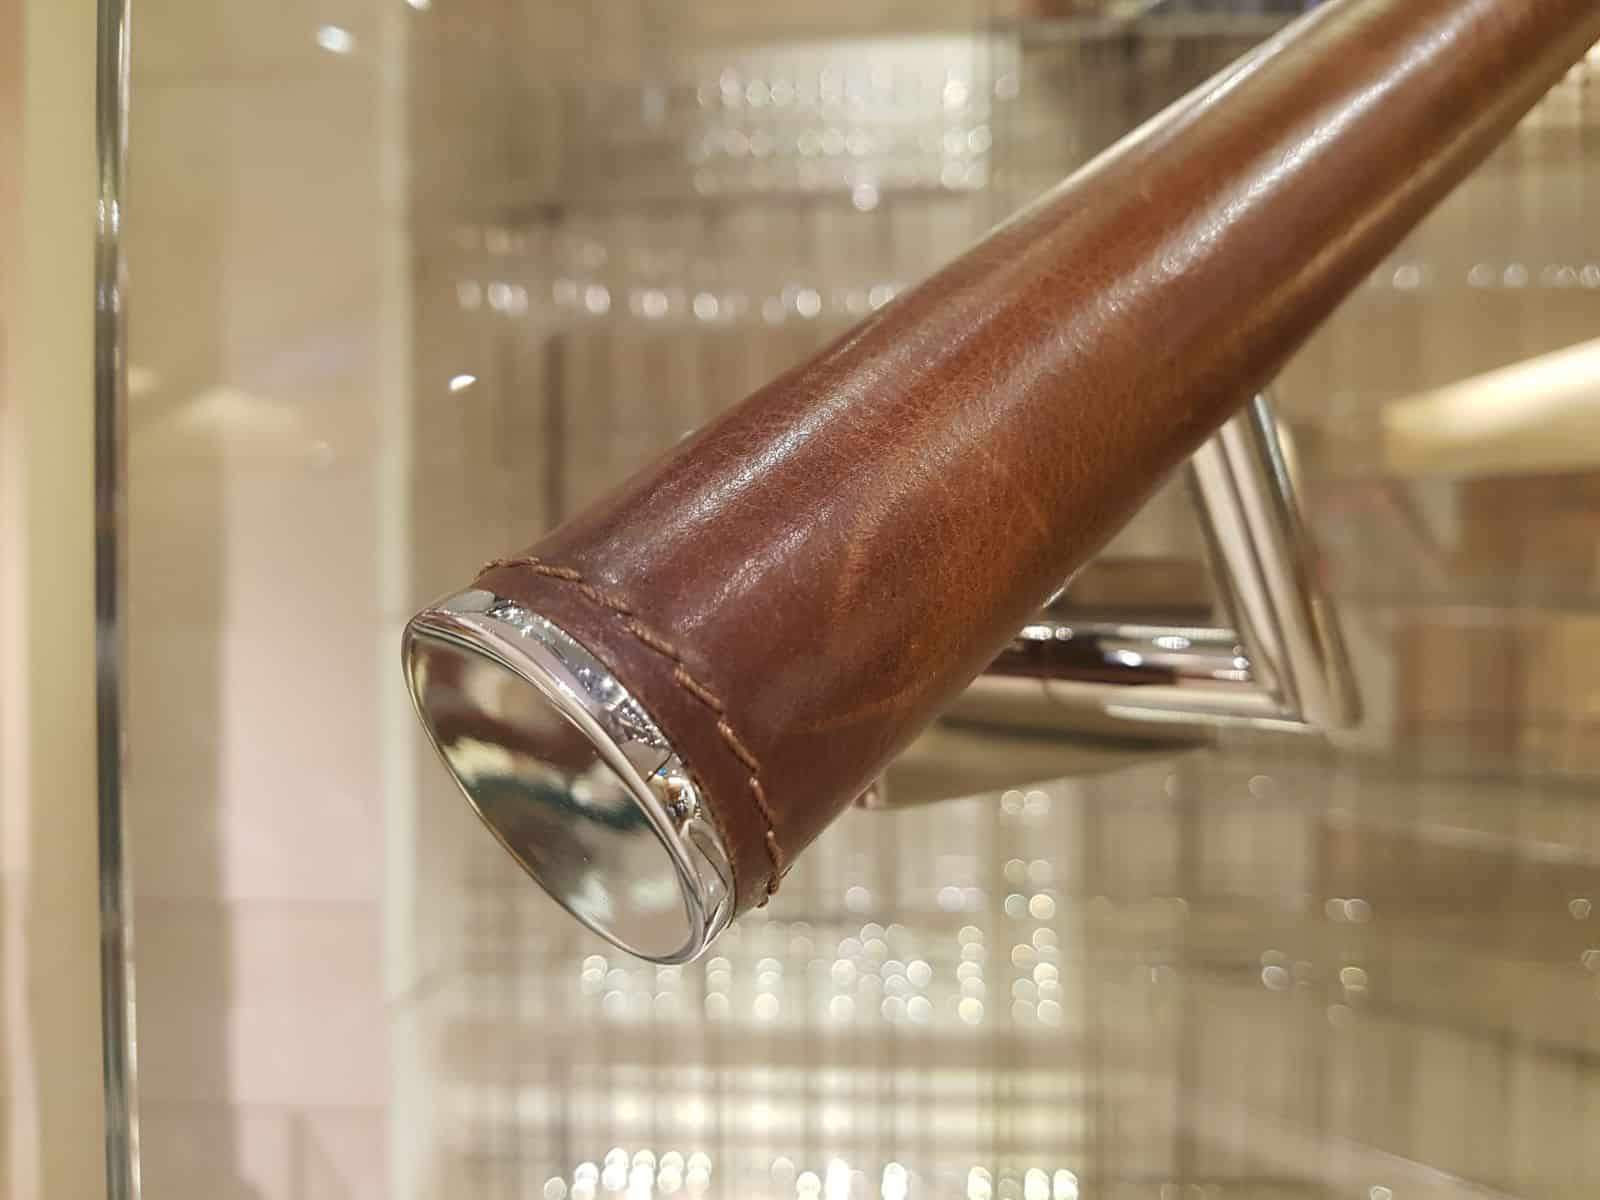 stainless steel handrail wrapped in leather